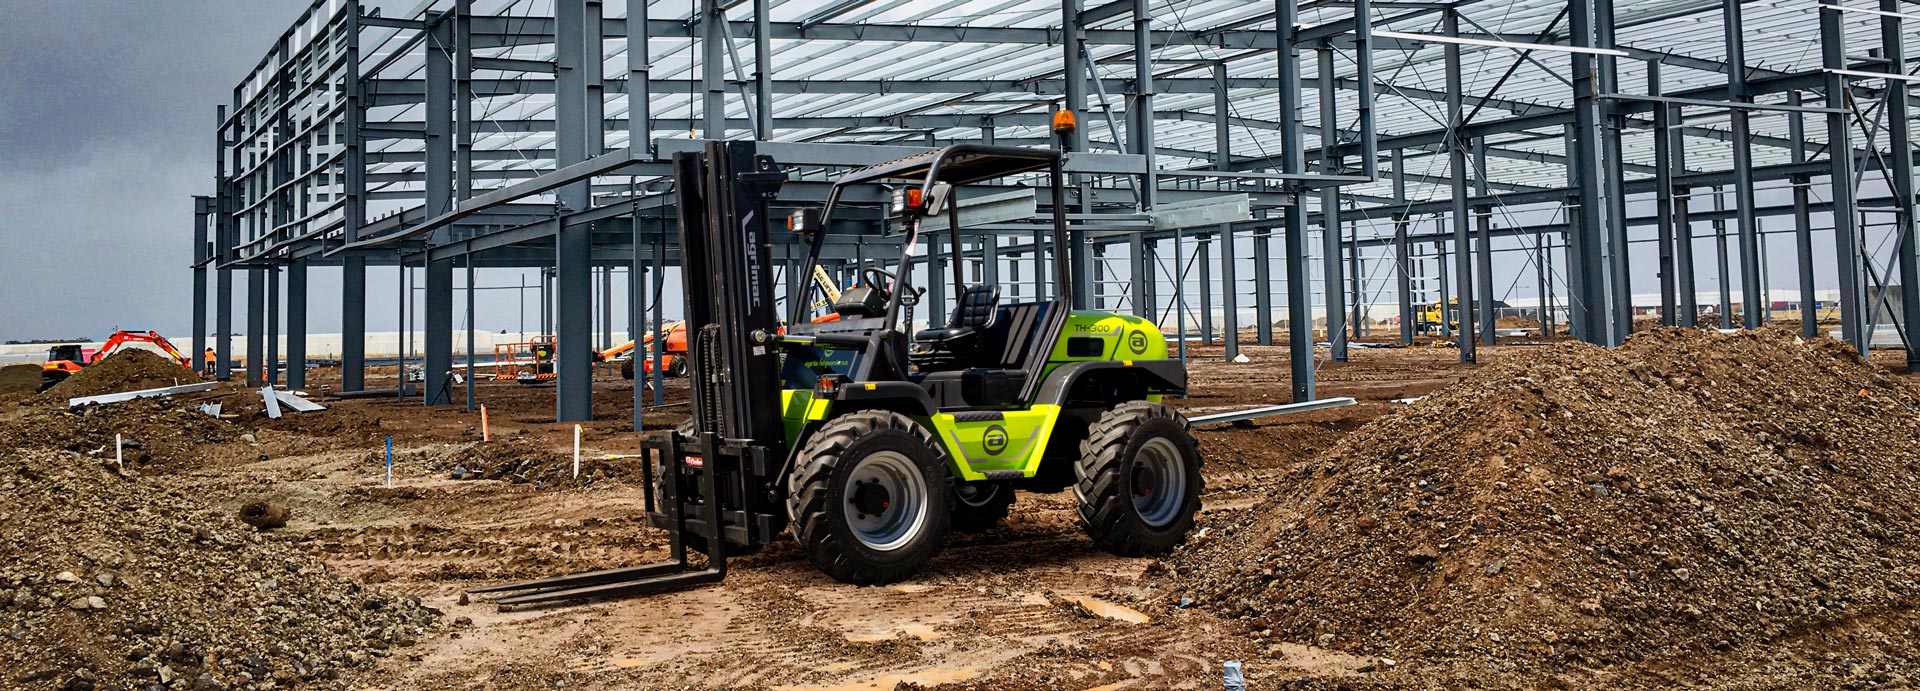 Agria all terrain forklift construction